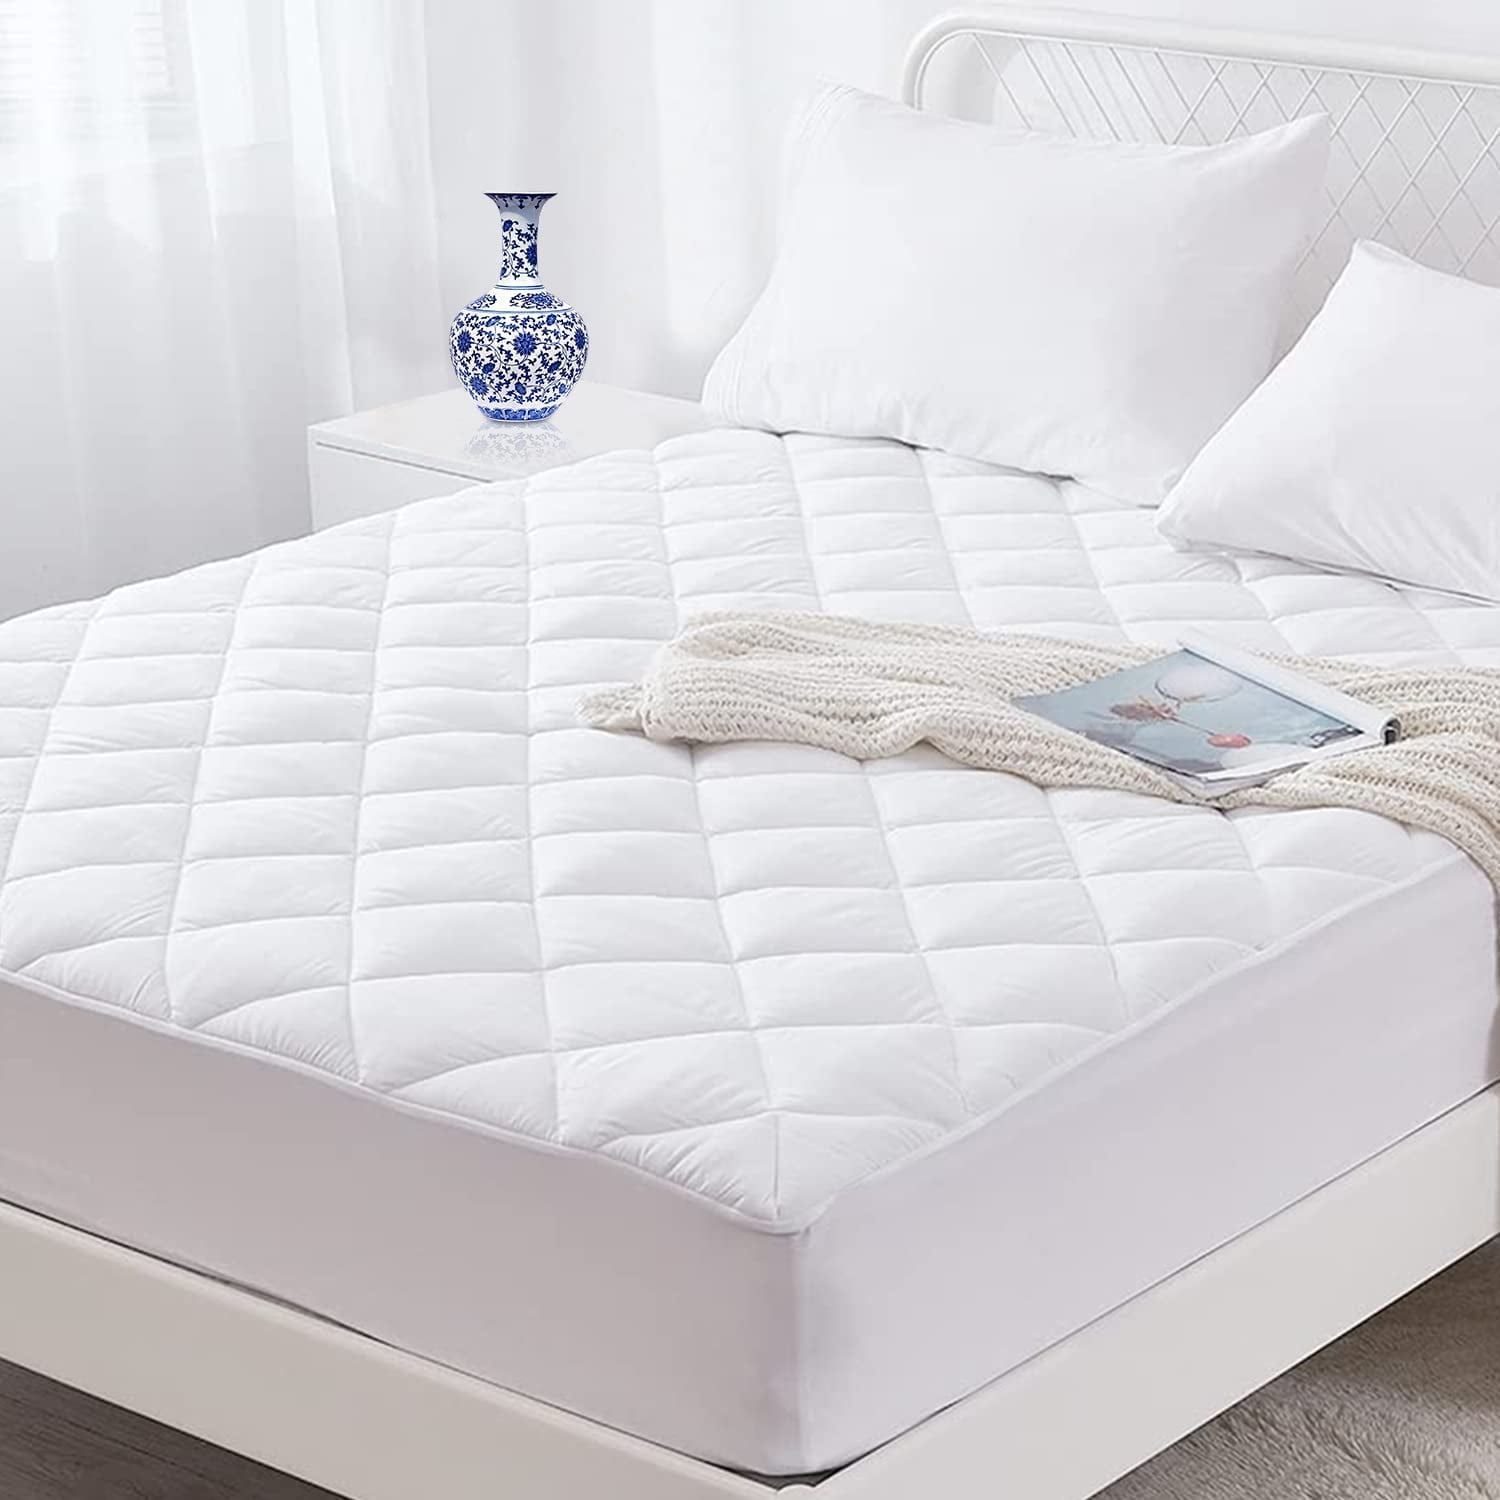 EXTRA DEEP QUILTED MATTRESS PROTECTOR 16" FITTED BED COVER:ALL SIZES 